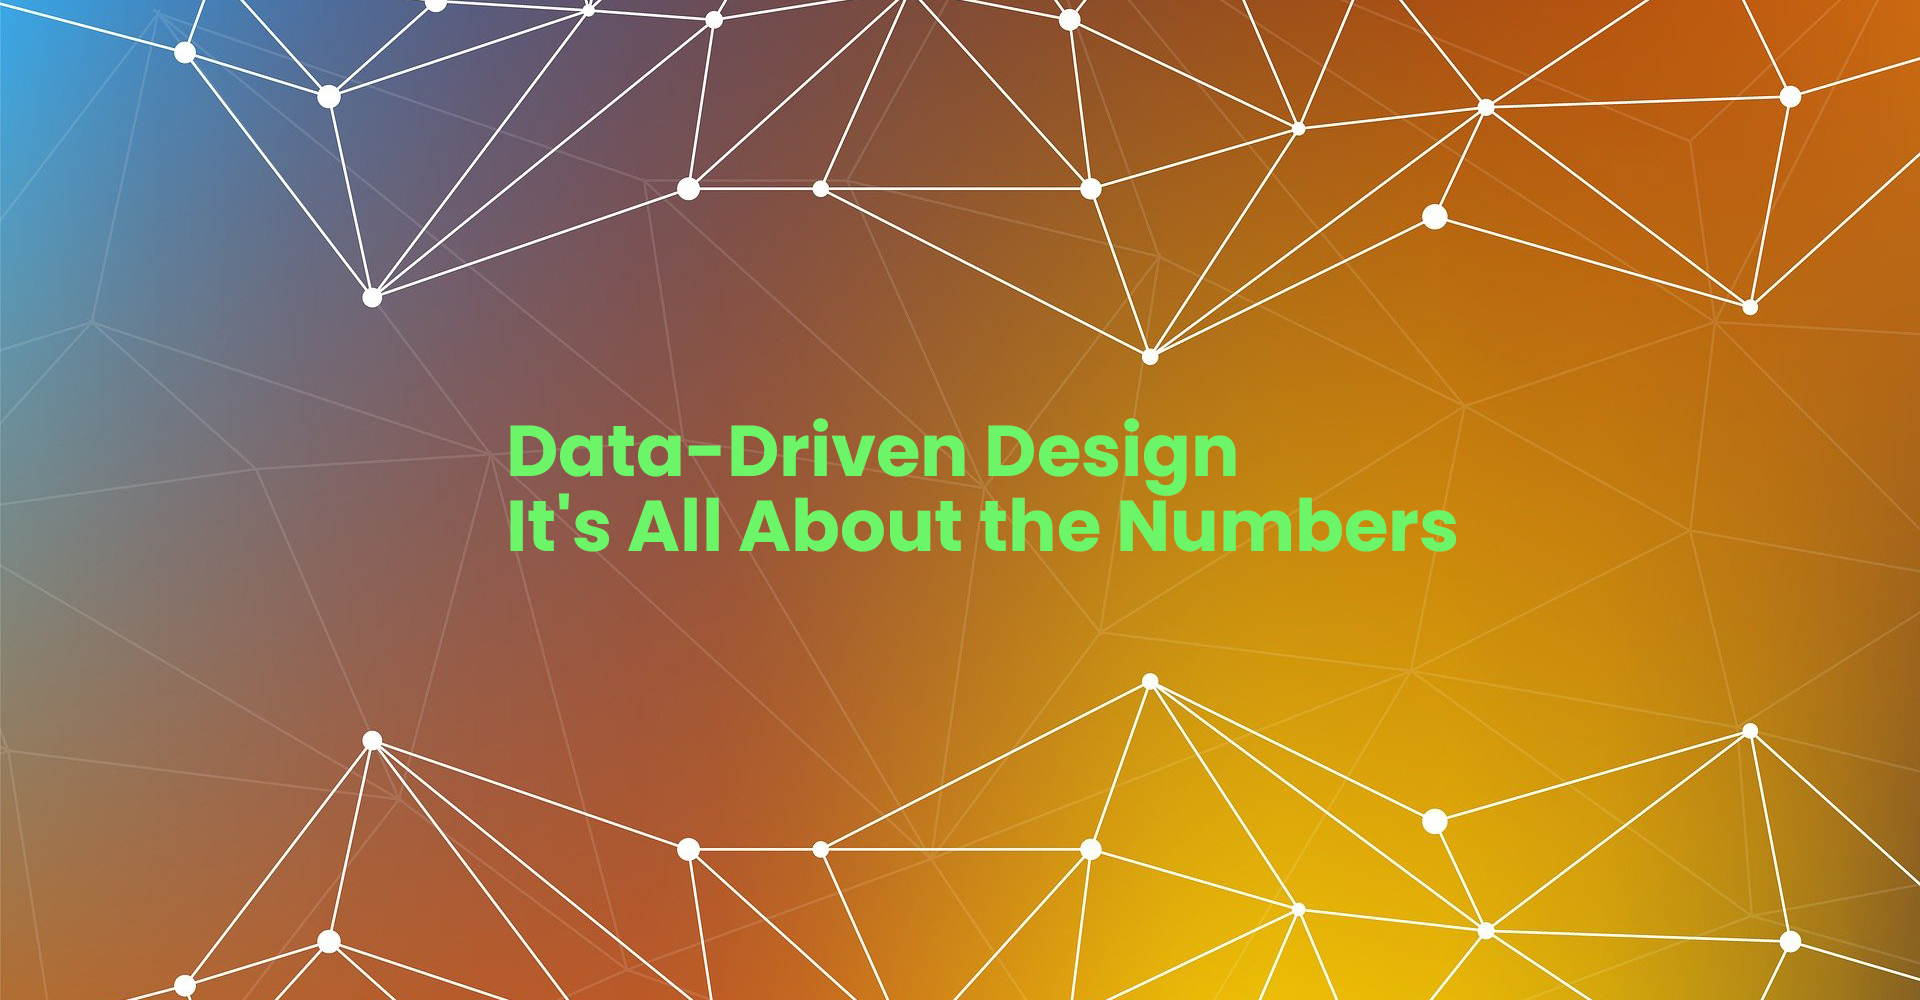 Data-Driven Design - It's All About the Numbers